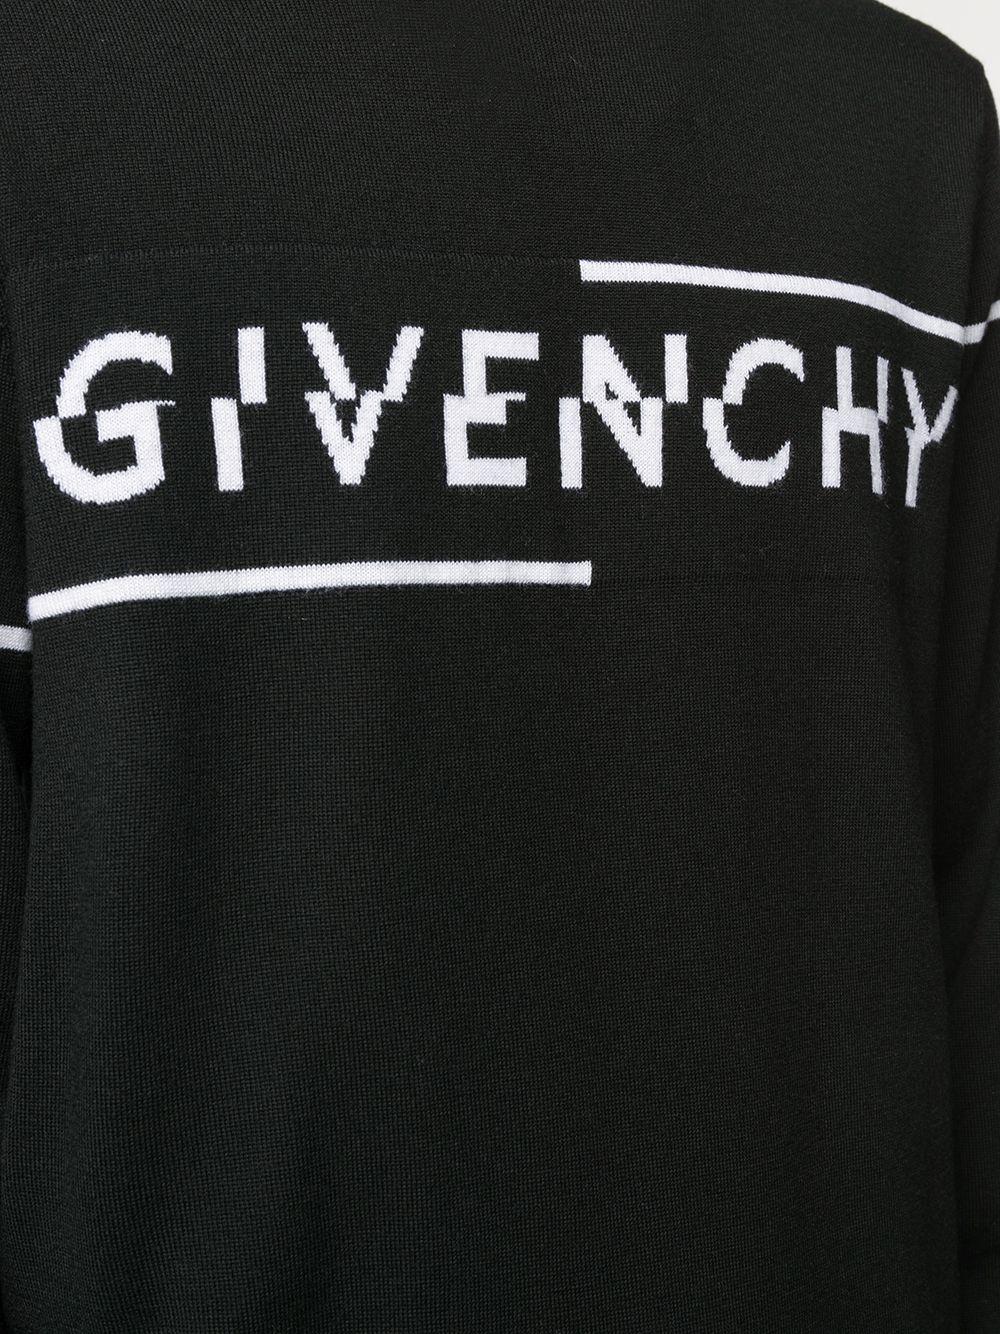 Givenchy Wool Logo Embroidered Jumper in Black for Men - Save 3% - Lyst